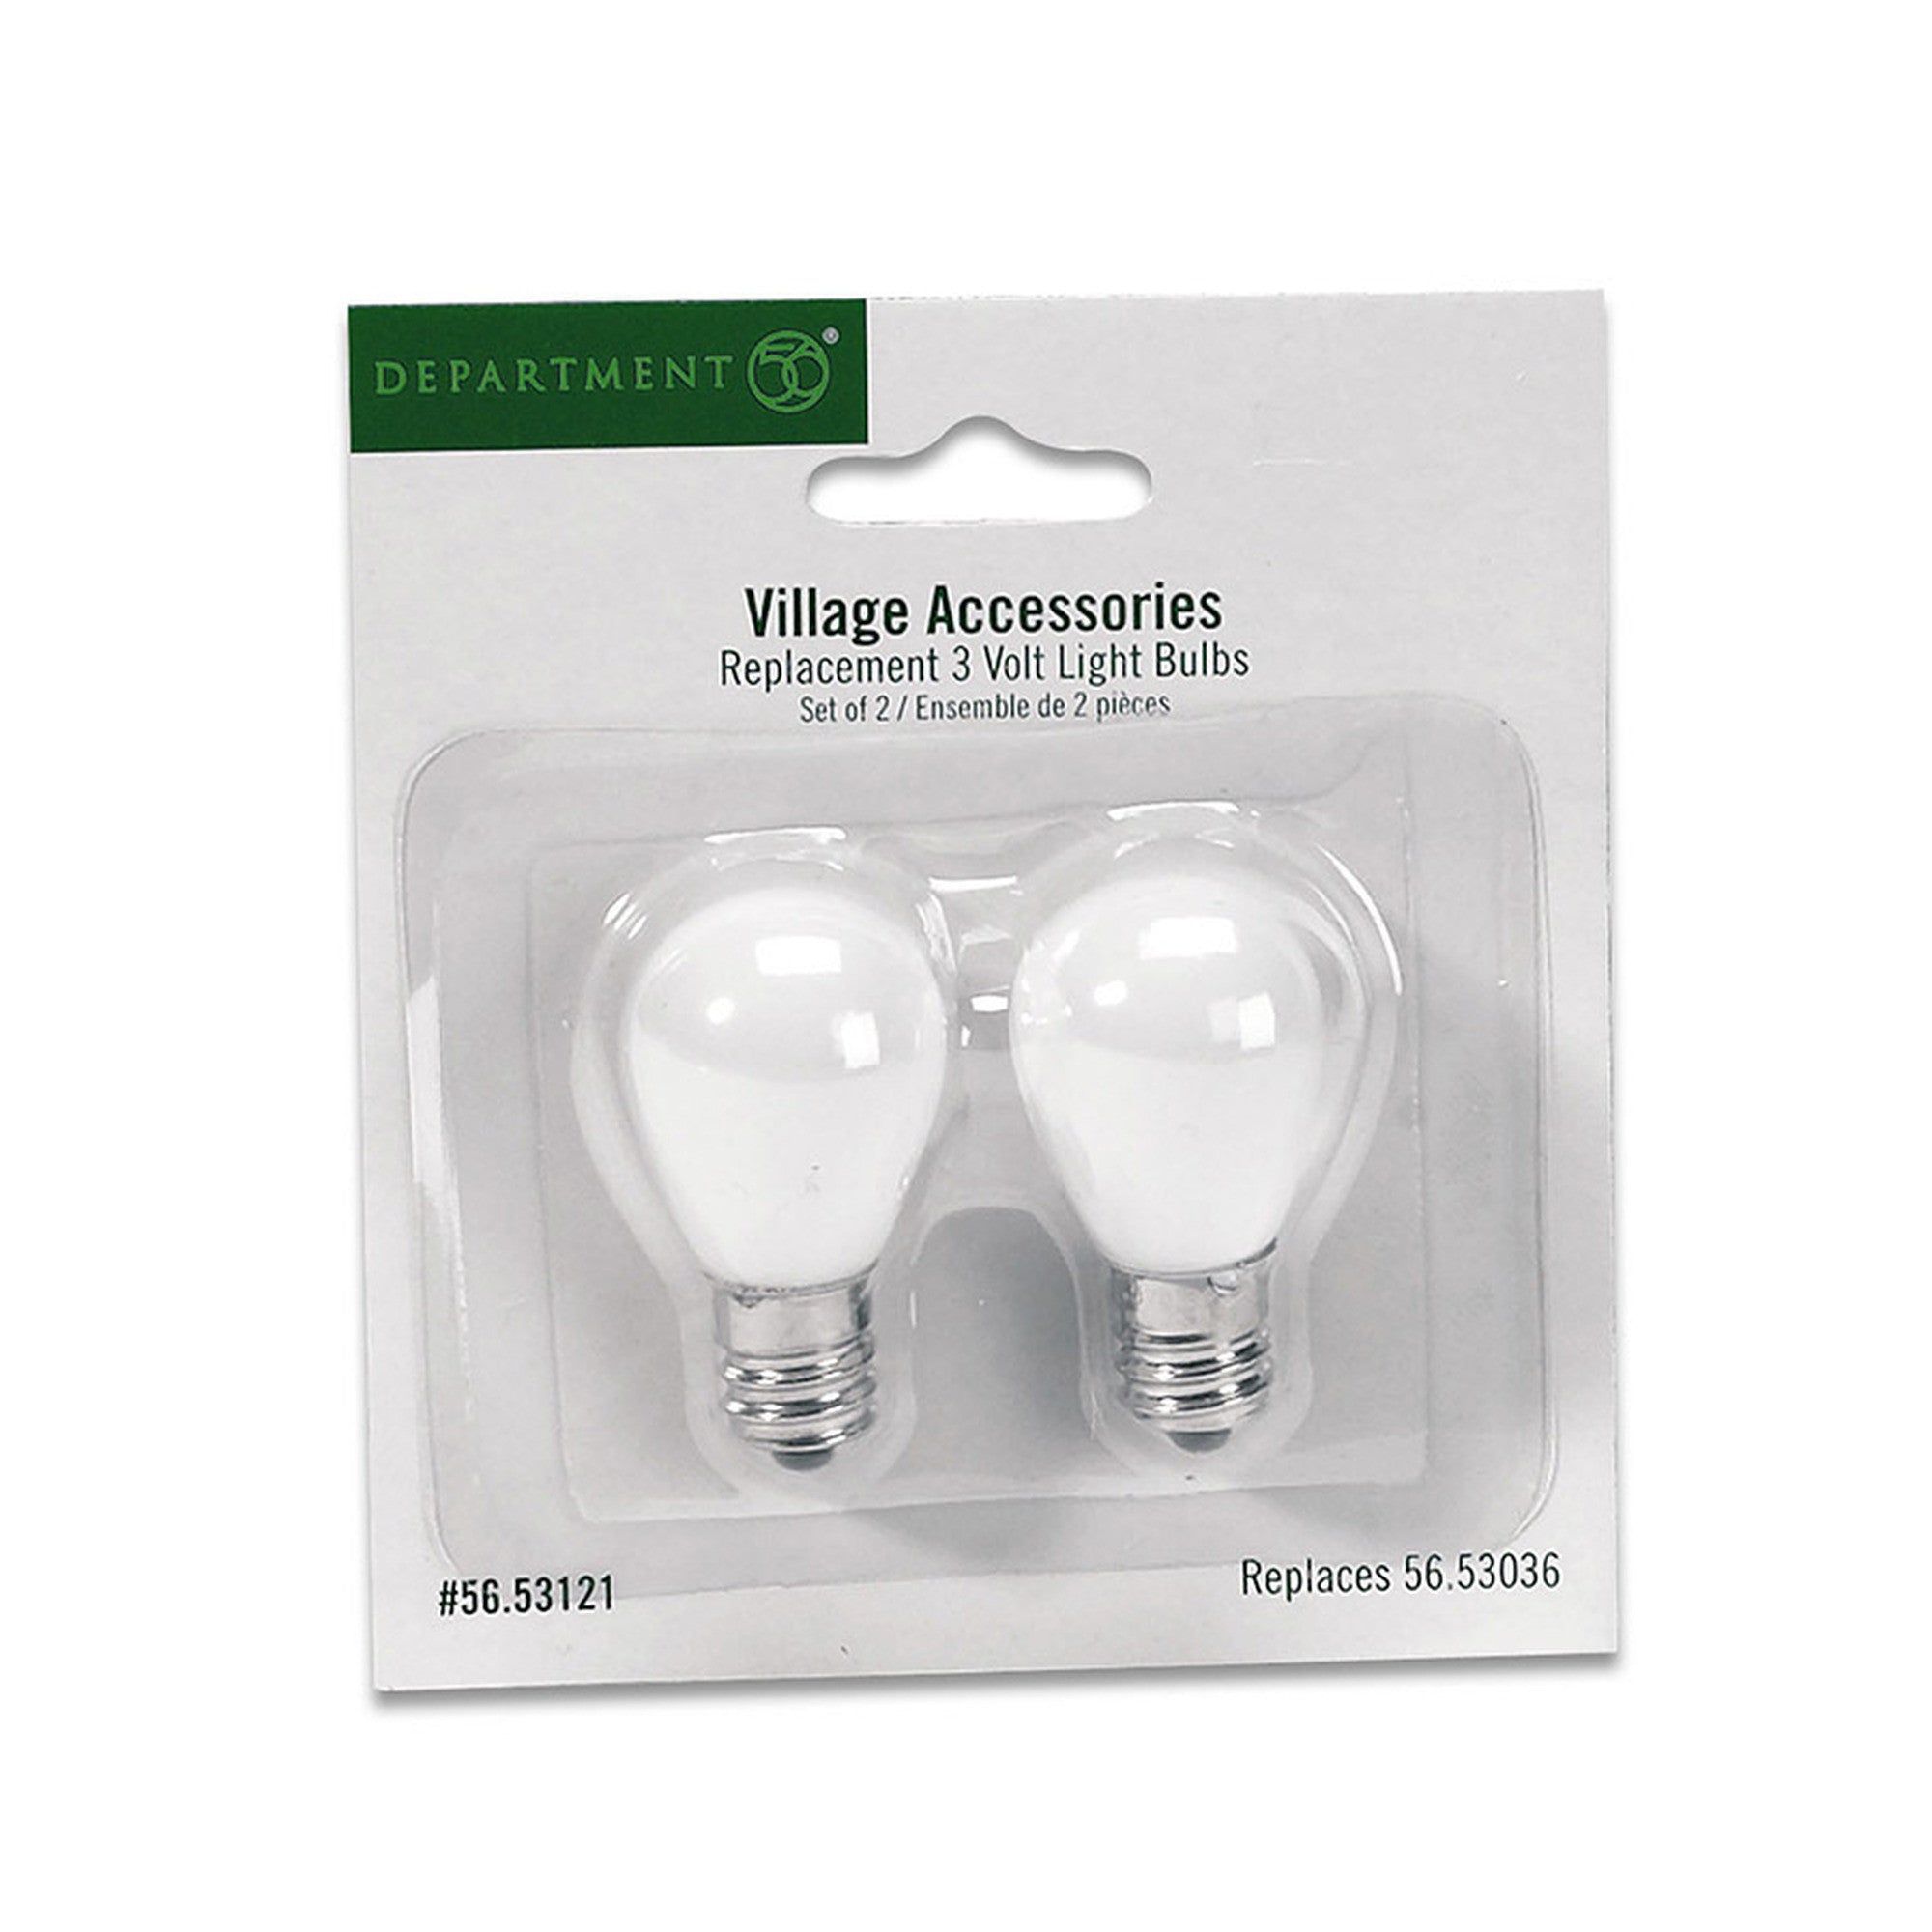 Village Accessory: Replacement 3V Light Bulbs